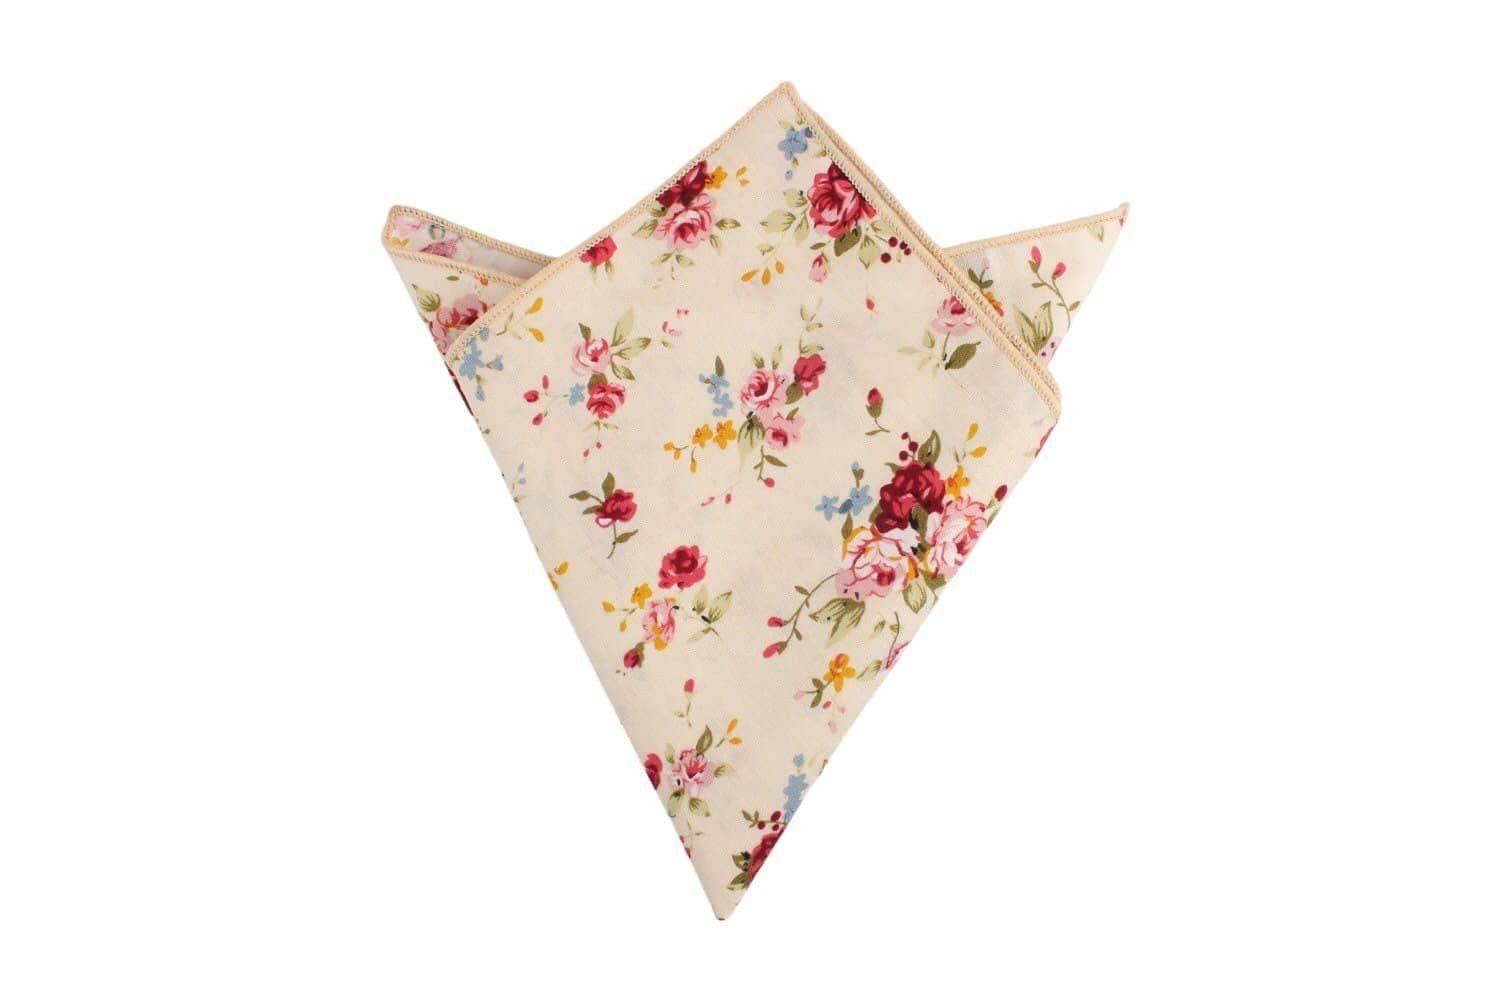 Cream Floral Pocket Square JONAH Mytieshop Cream Floral Pocket SquareMaterial CottonItem Length: 23 cm ( 9 inches)Item Width : 22 cm (8.6 inches) A dashing way to top off your tuxedo. This floral pocket square is the perfect finishing touch to your wedding day ensemble. With its soft cream color and intricate floral print, it's sure to make a statement. Add a touch of personality to your look with this dashing pocket square. It's sure to make you feel like the best dressed man in the room.